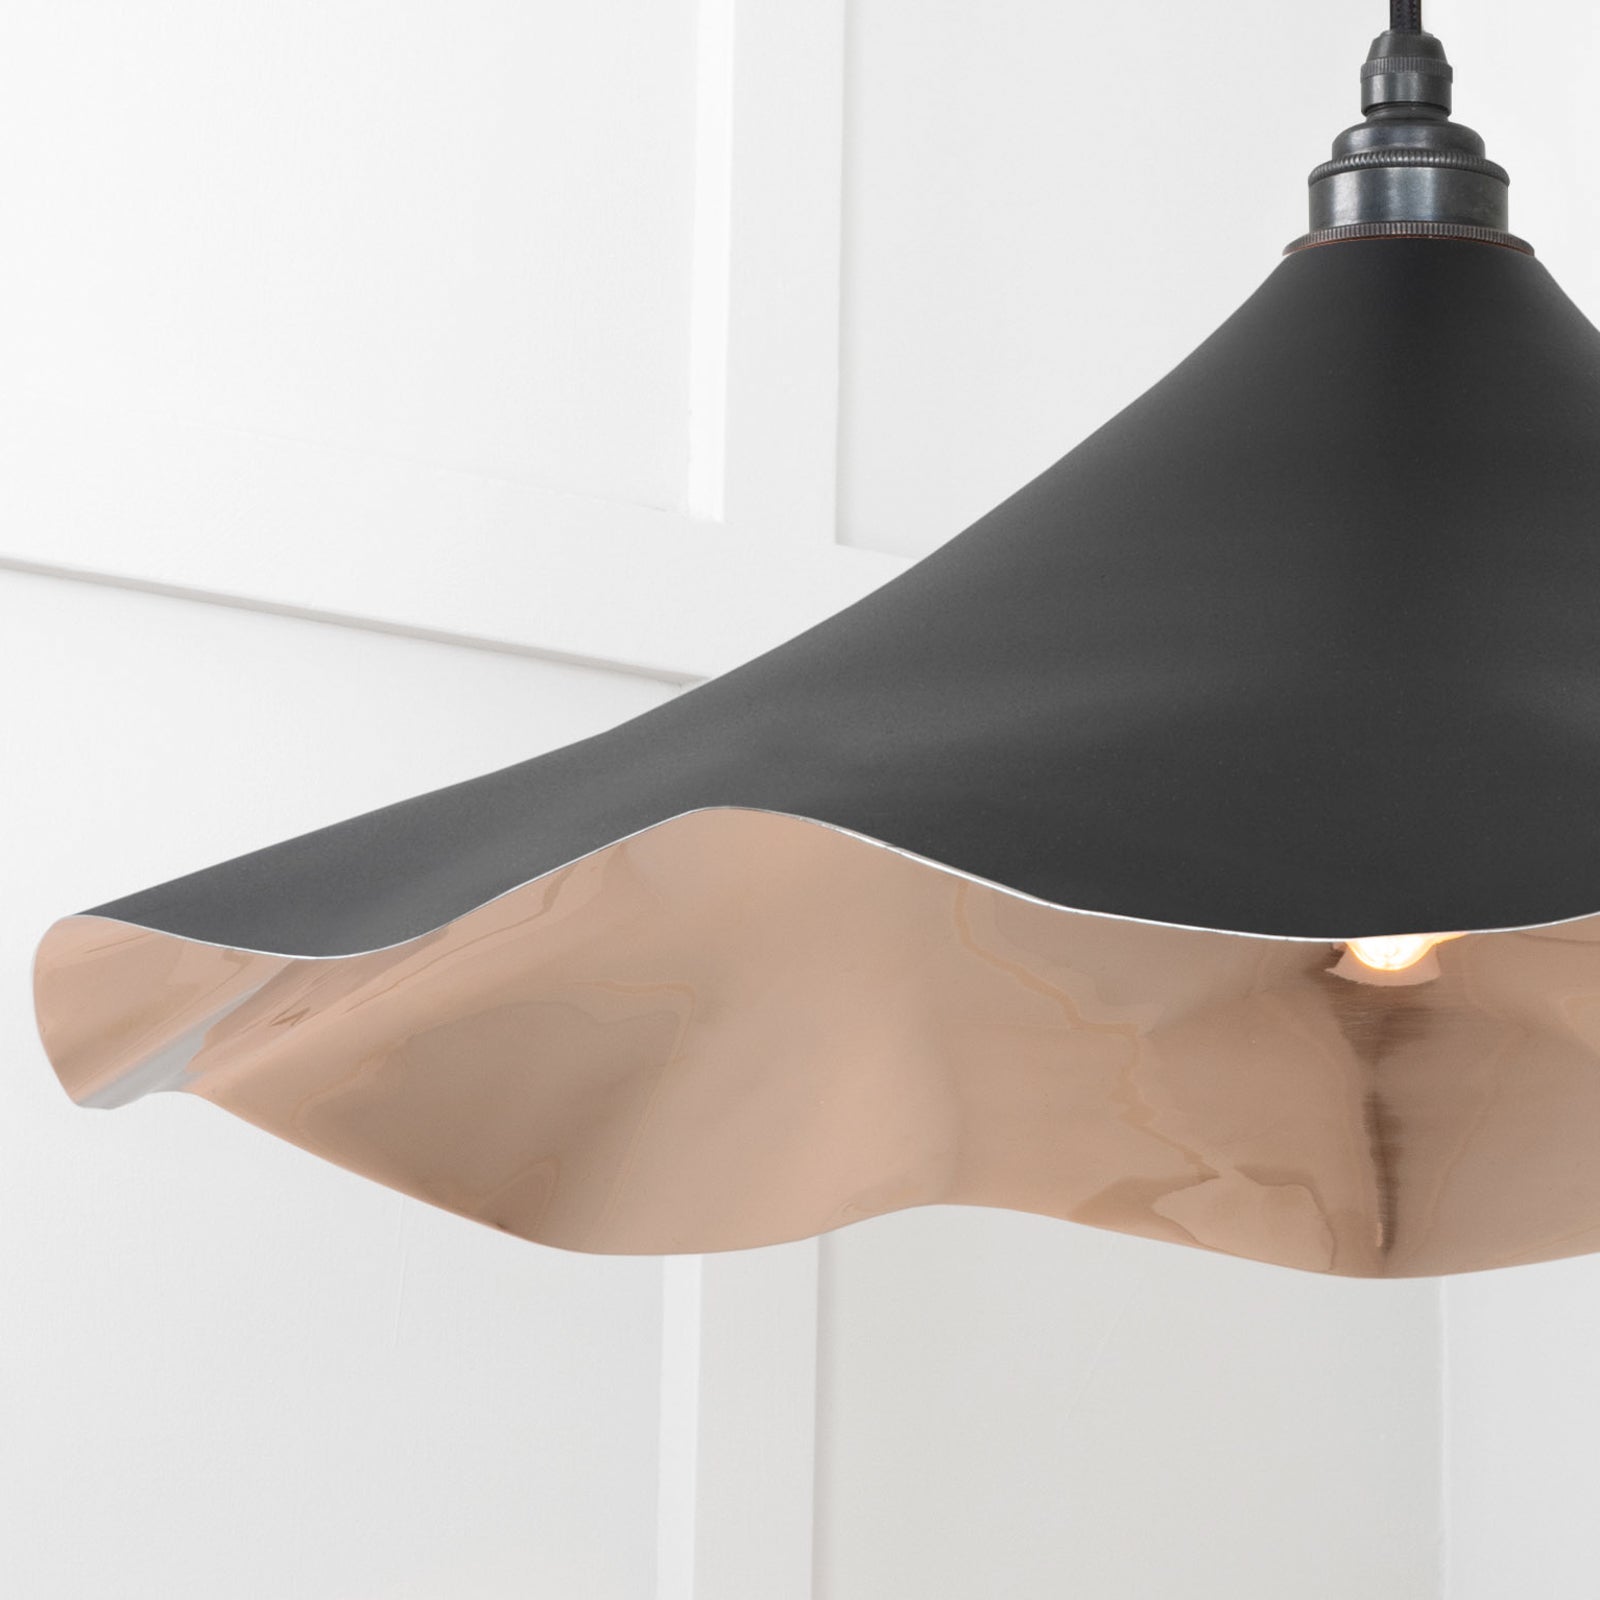 SHOW Close Up Image of Flora Ceiling Light in Elan Black in smooth Nickel